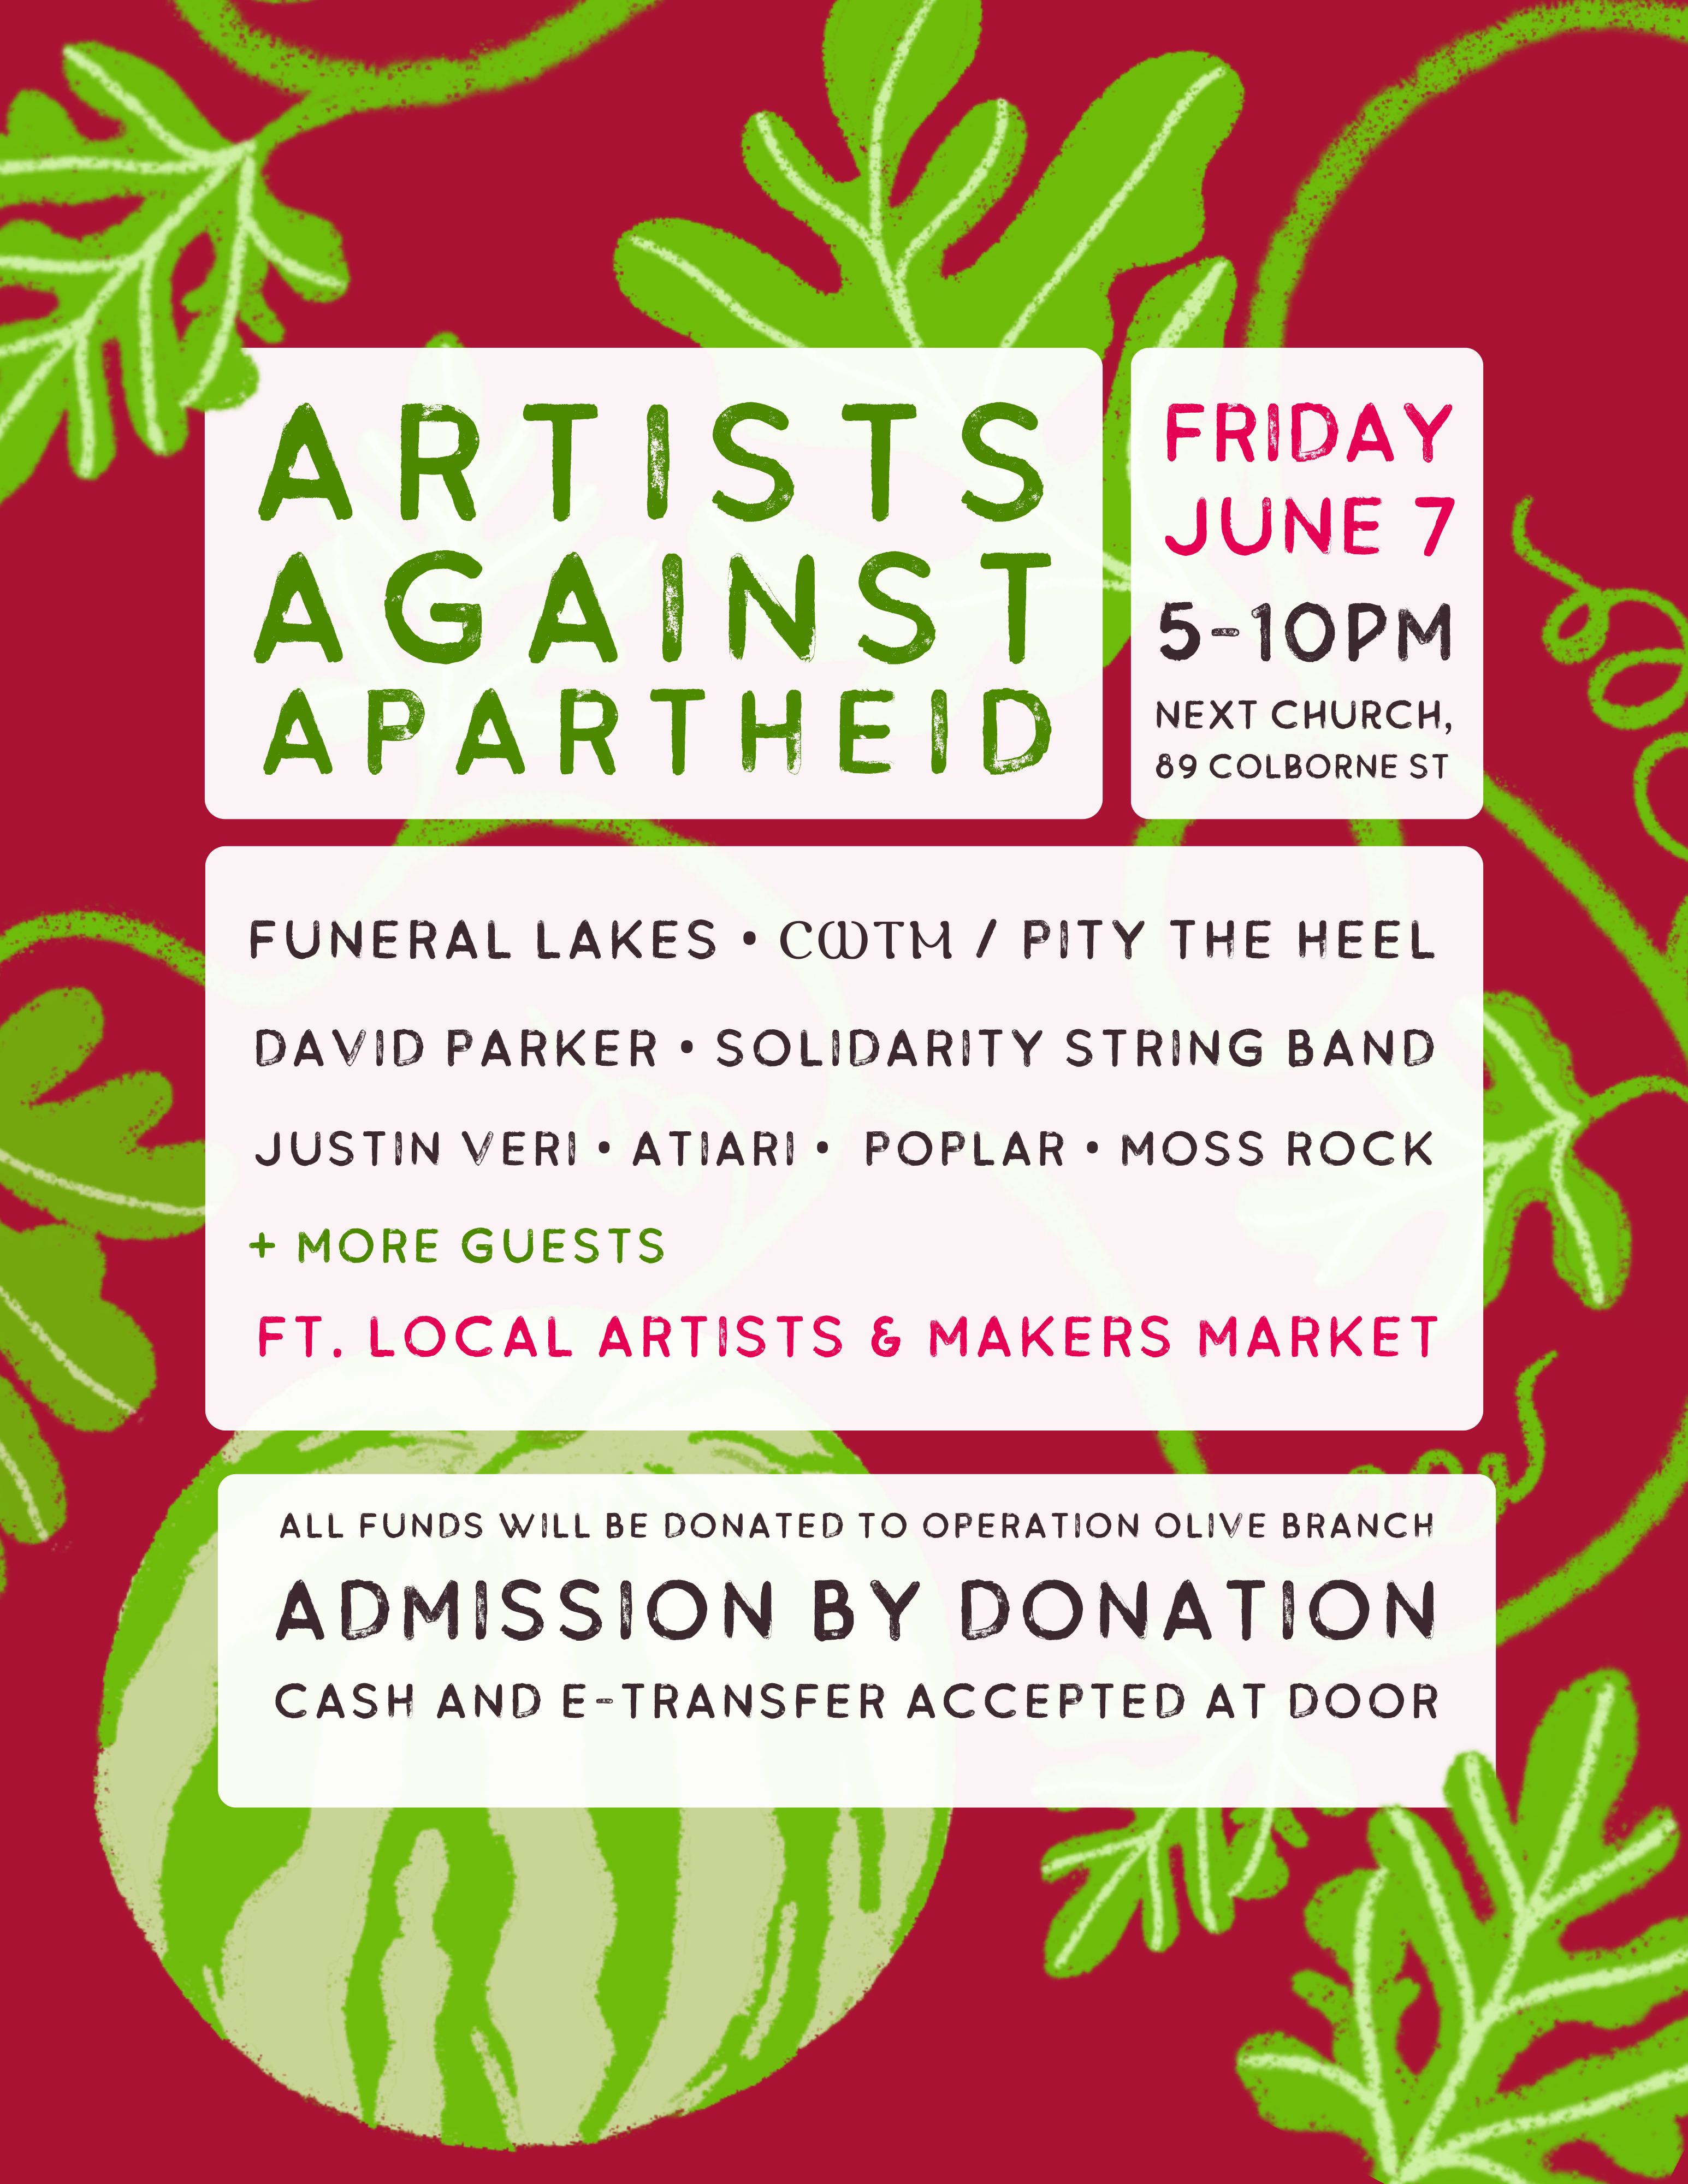 Poster for 'Artists Against Apartheid'. The event title, date, time, and location are listed. Text also includes: "All funds will be donated to operation olive branch Admission by donation Cash and e-transfer accepted at door". Some of the artists performing are also named.